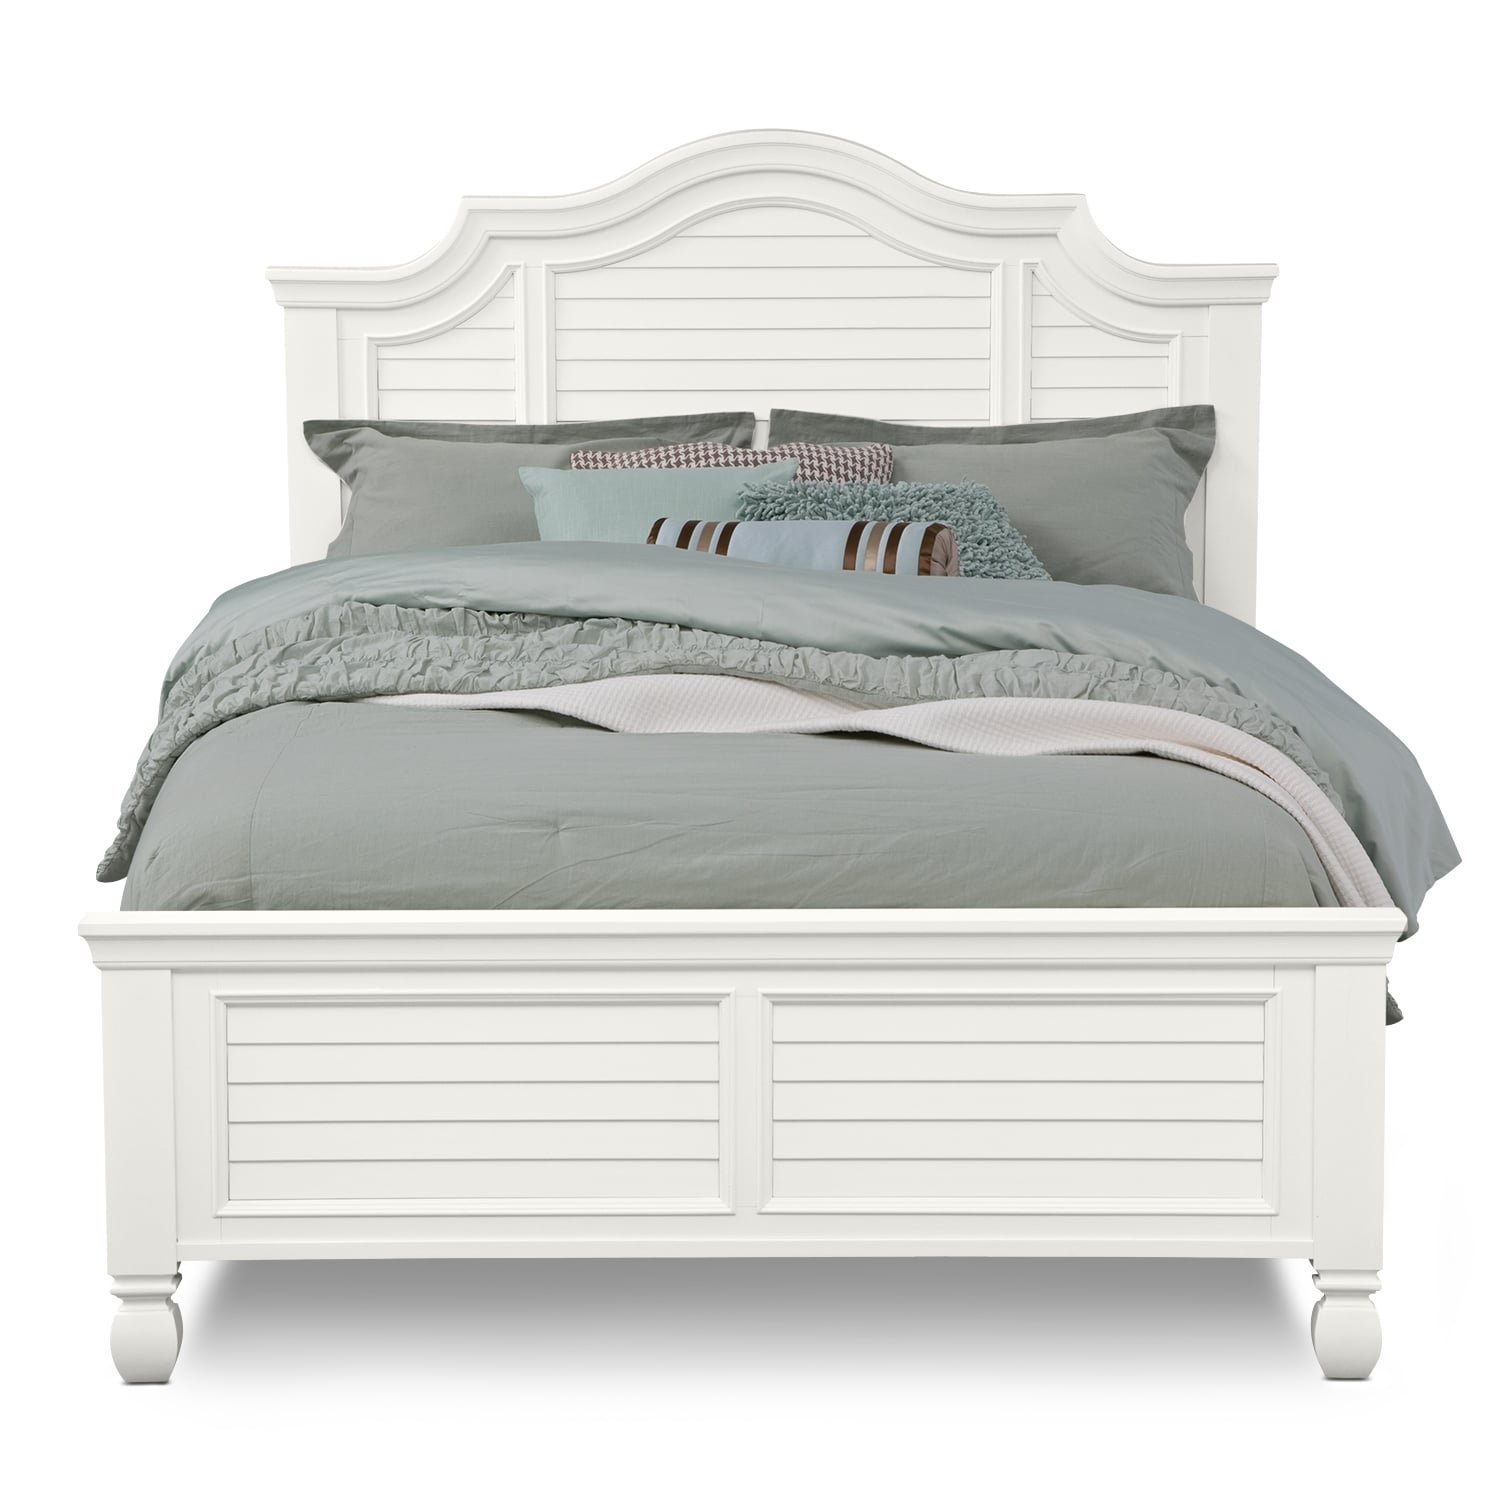 Plantation Cove White Panel Bedroom Queen Bed  Value City Furniture